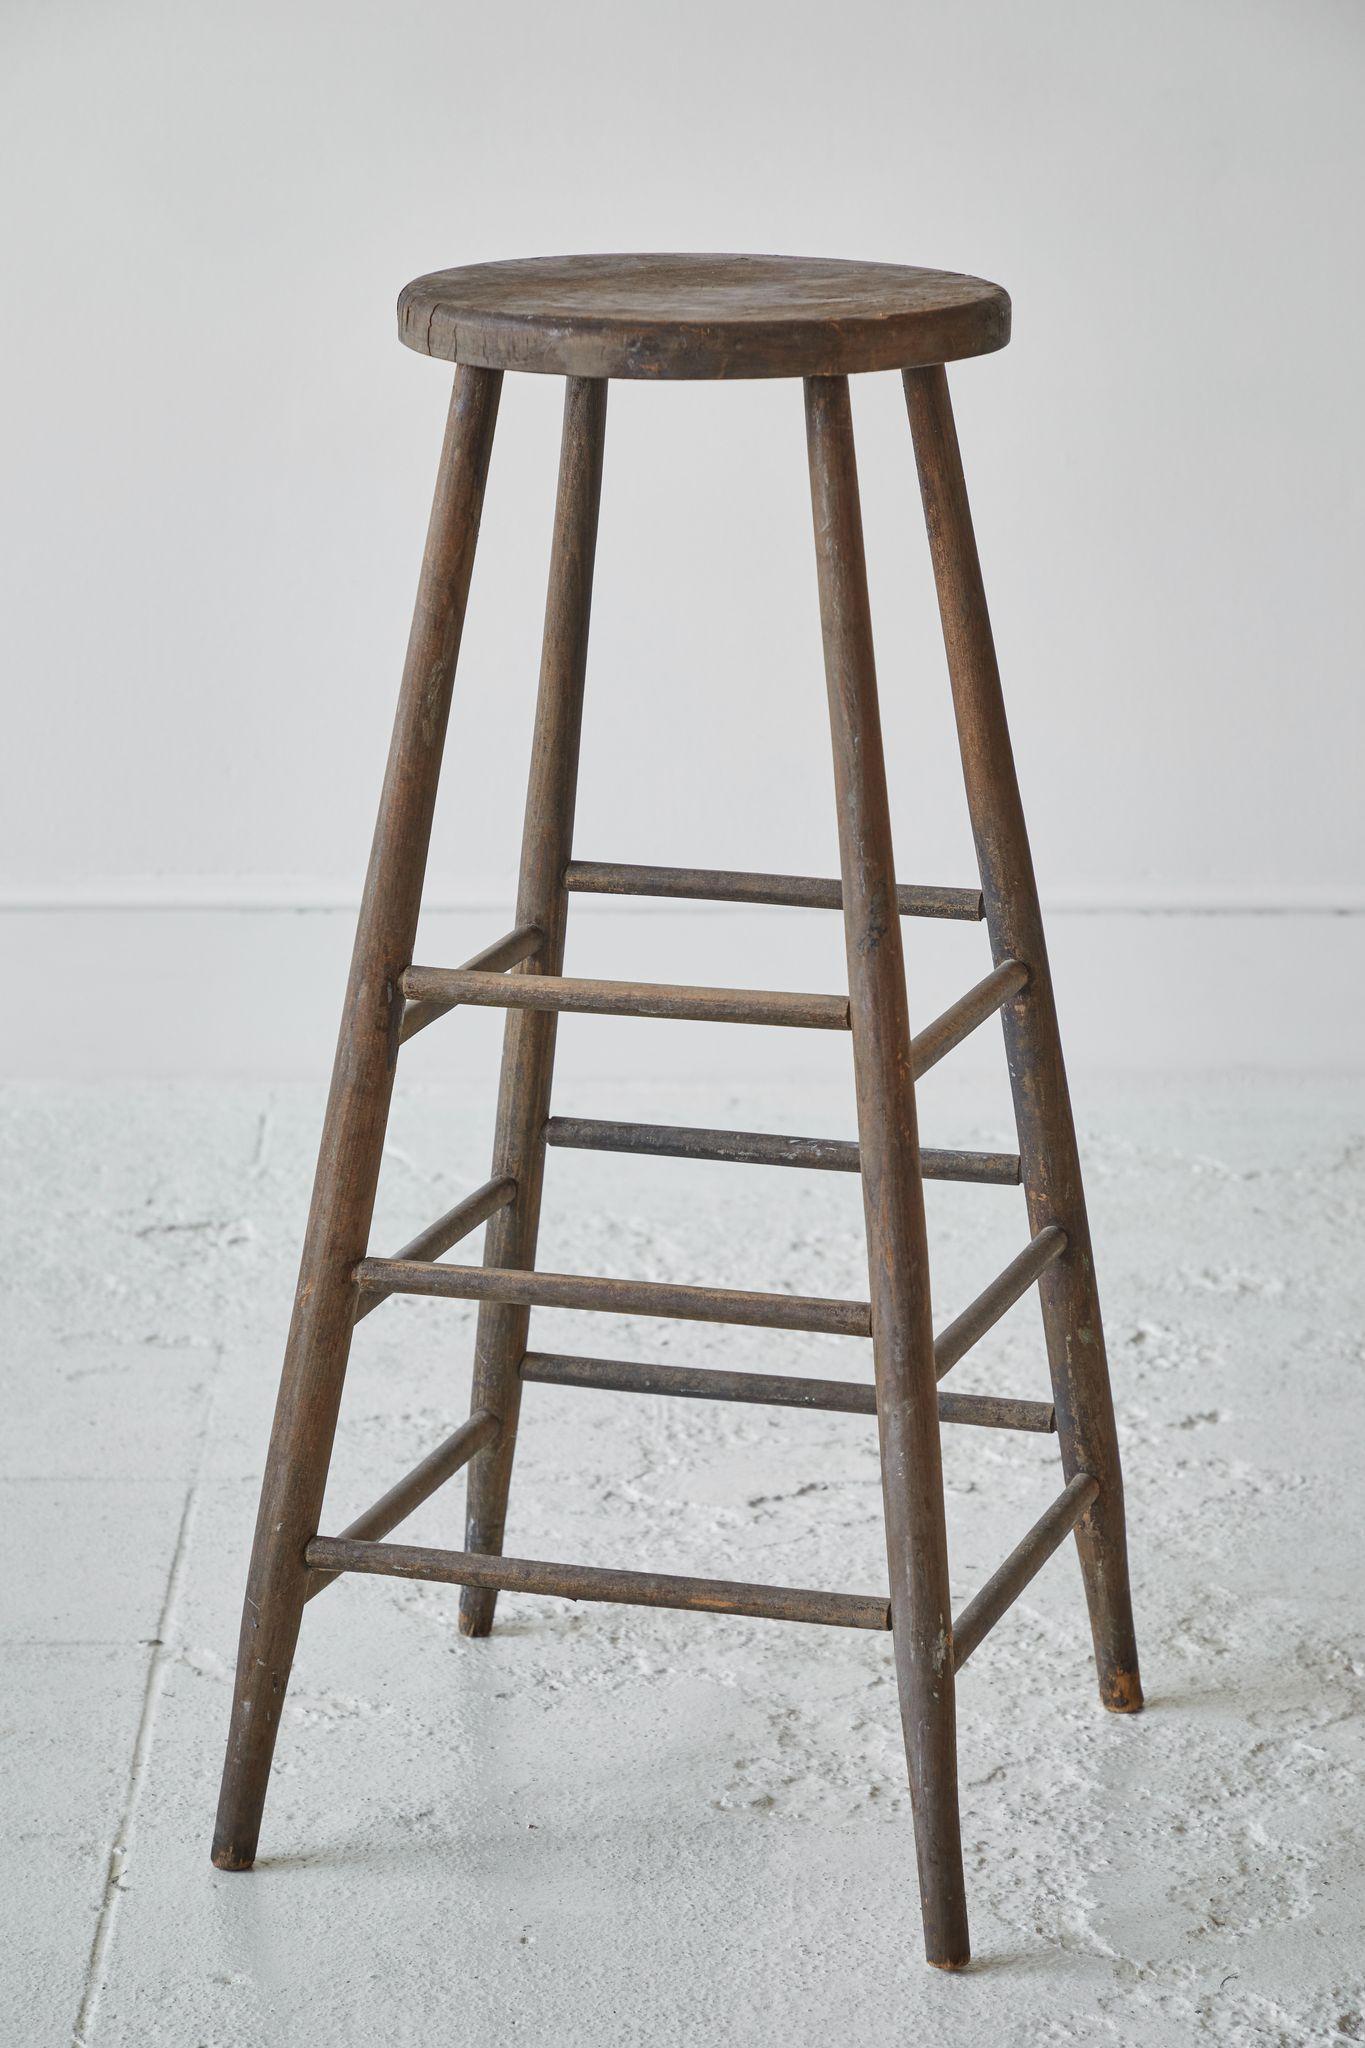 Wood Early American Rustic Tall Stool